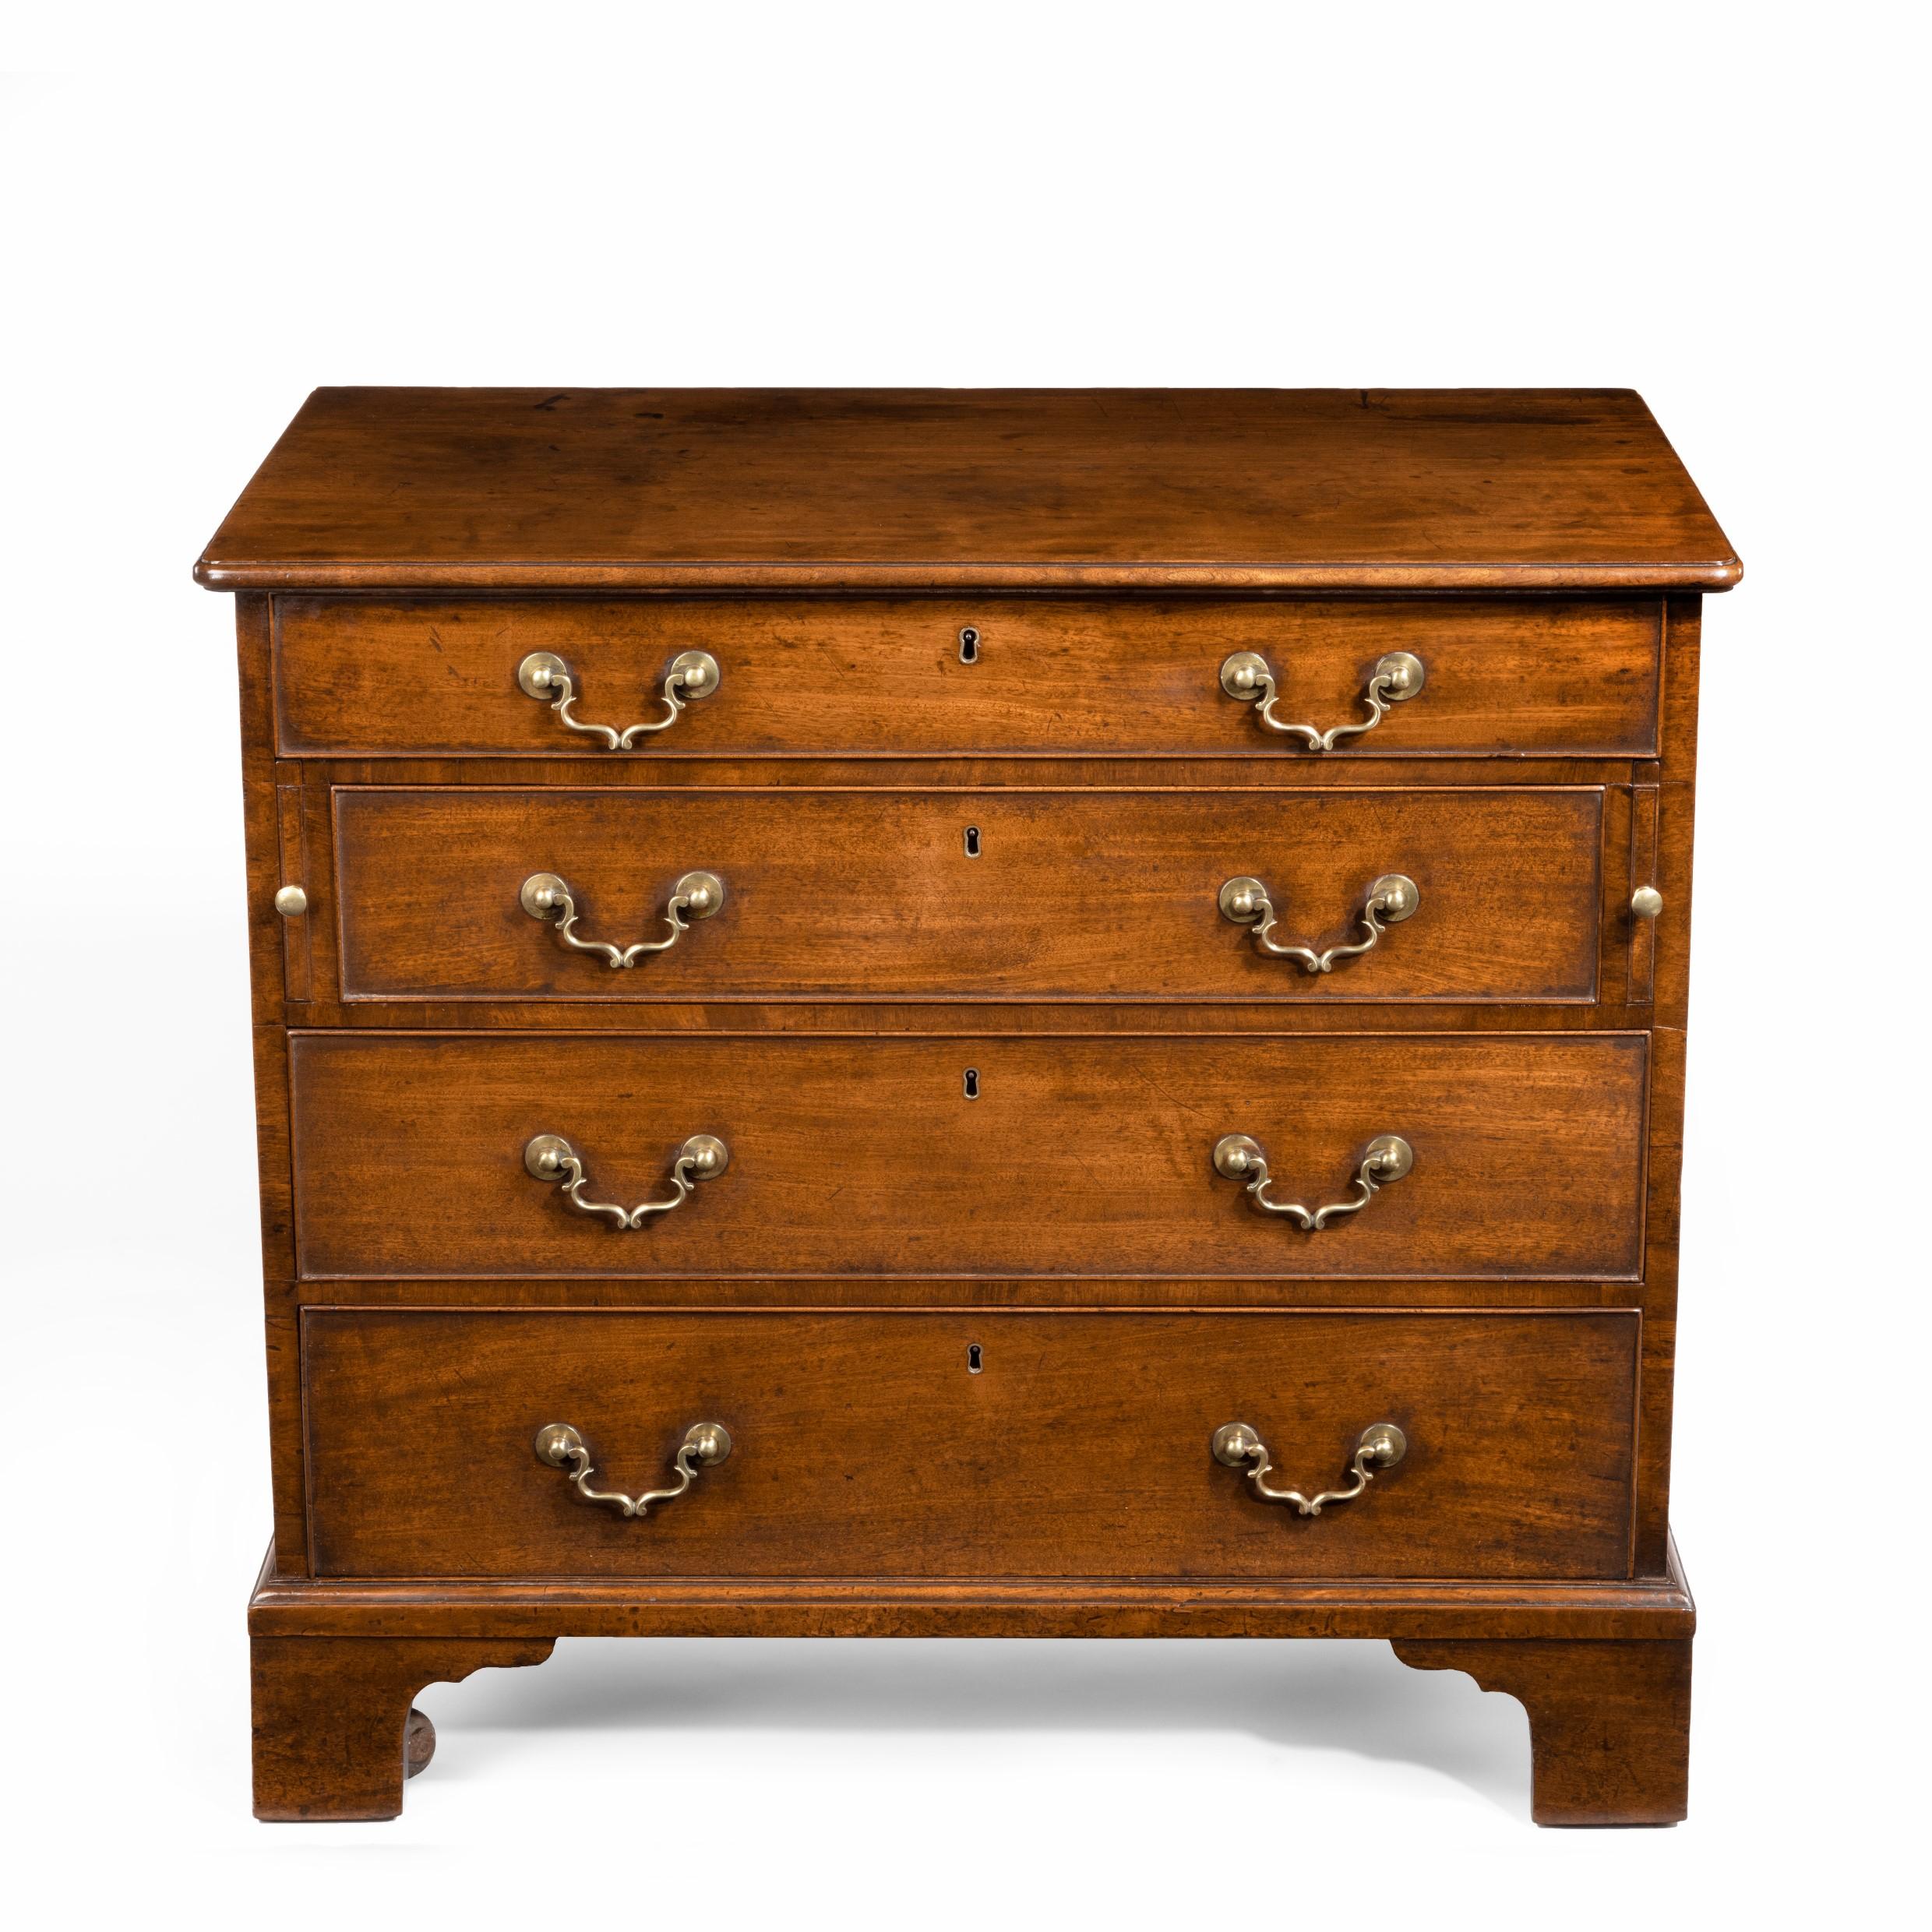 A George III, Chippendale period, mahogany chest of drawers, of rectangular form with four graduated drawers with the original bracket handles, the top drawer fitted with a brushing slide, three compartments and a hinged pen-tray, all on square